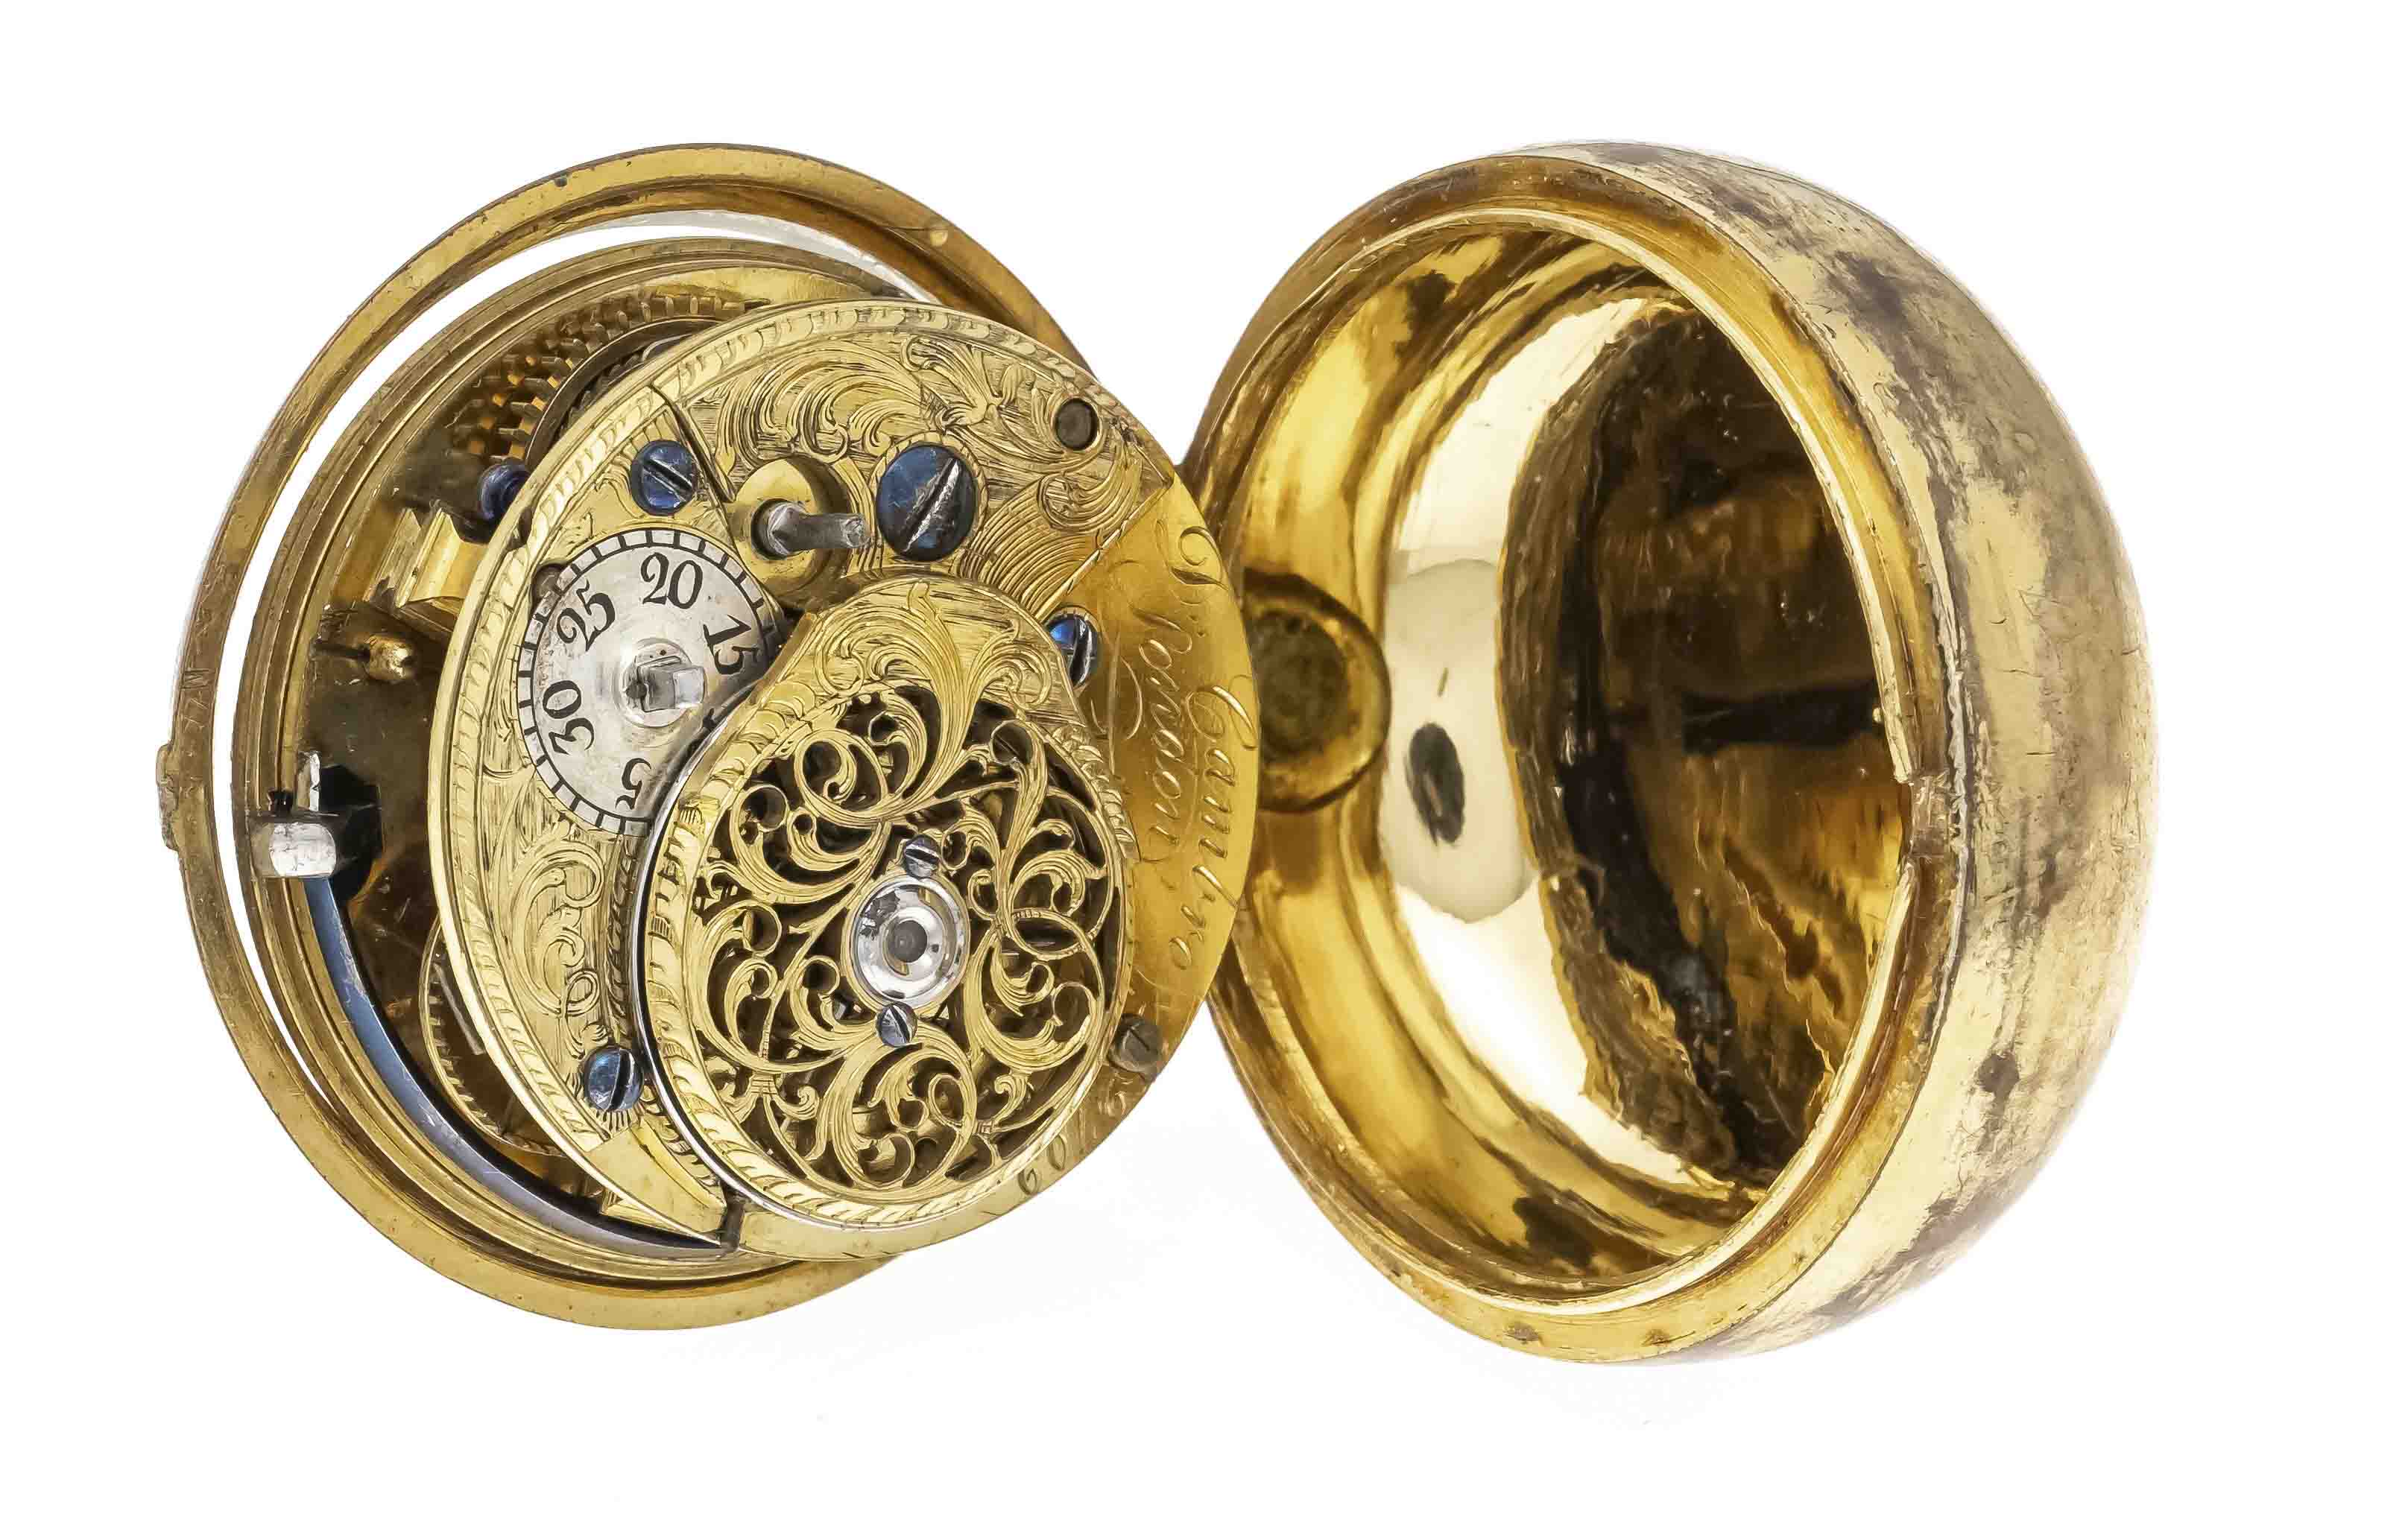 Spindle pocket watch by D. Cambro London, in a gilded over-case, spindle movement with chain - Image 2 of 2